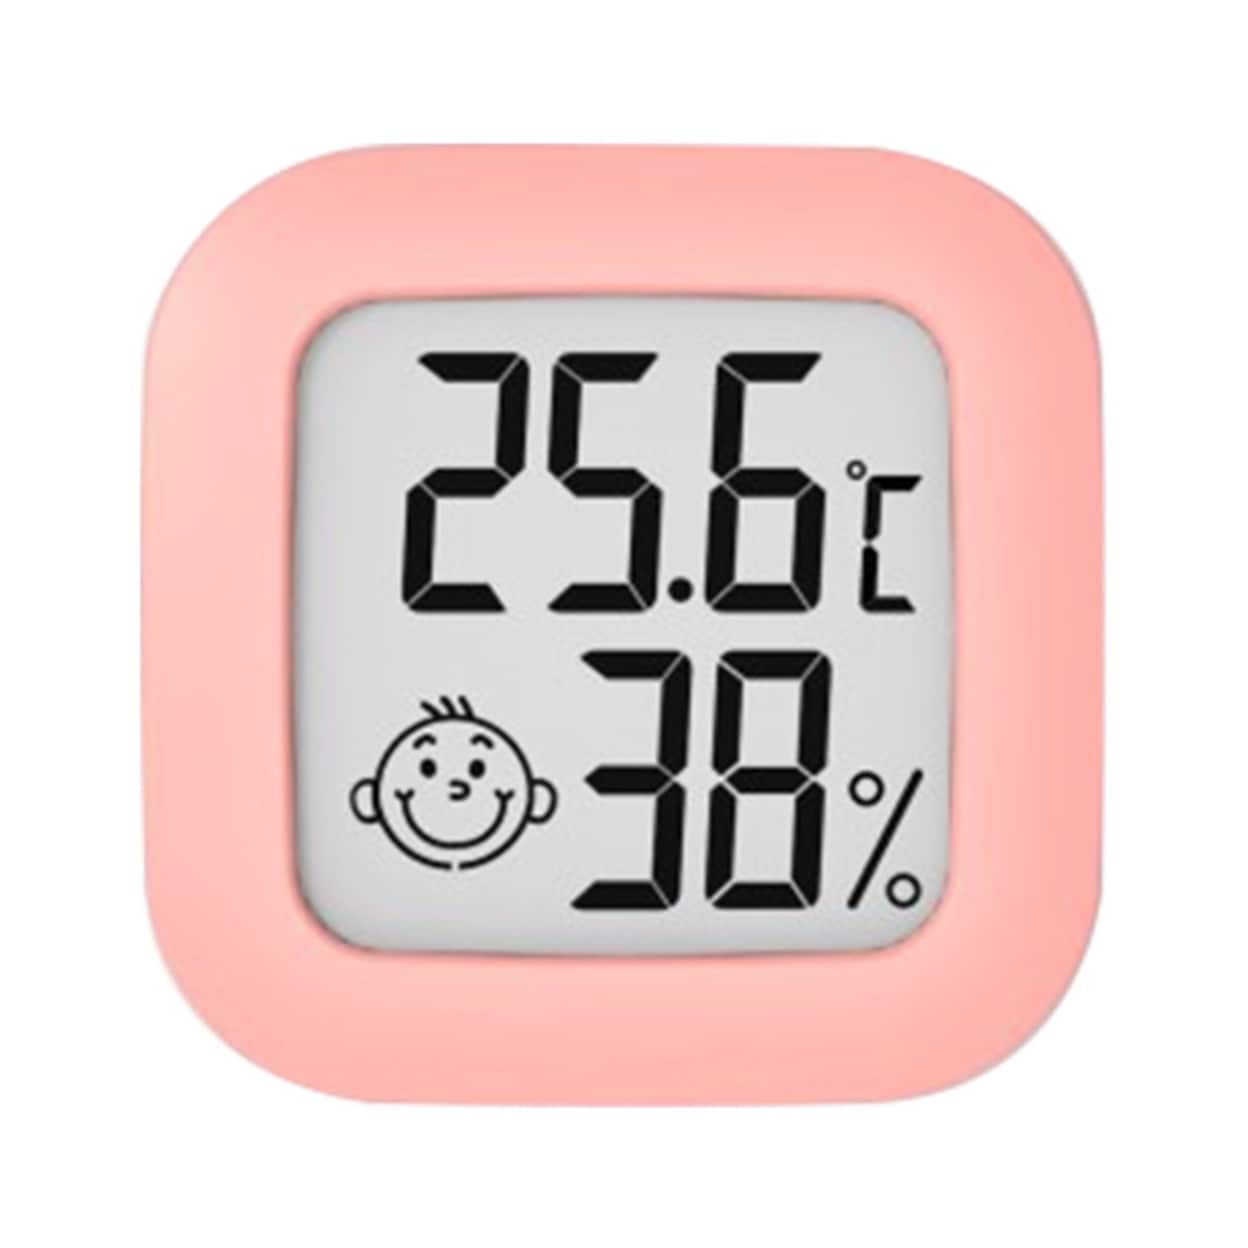 5063 Certified Hygrometer Thermometer